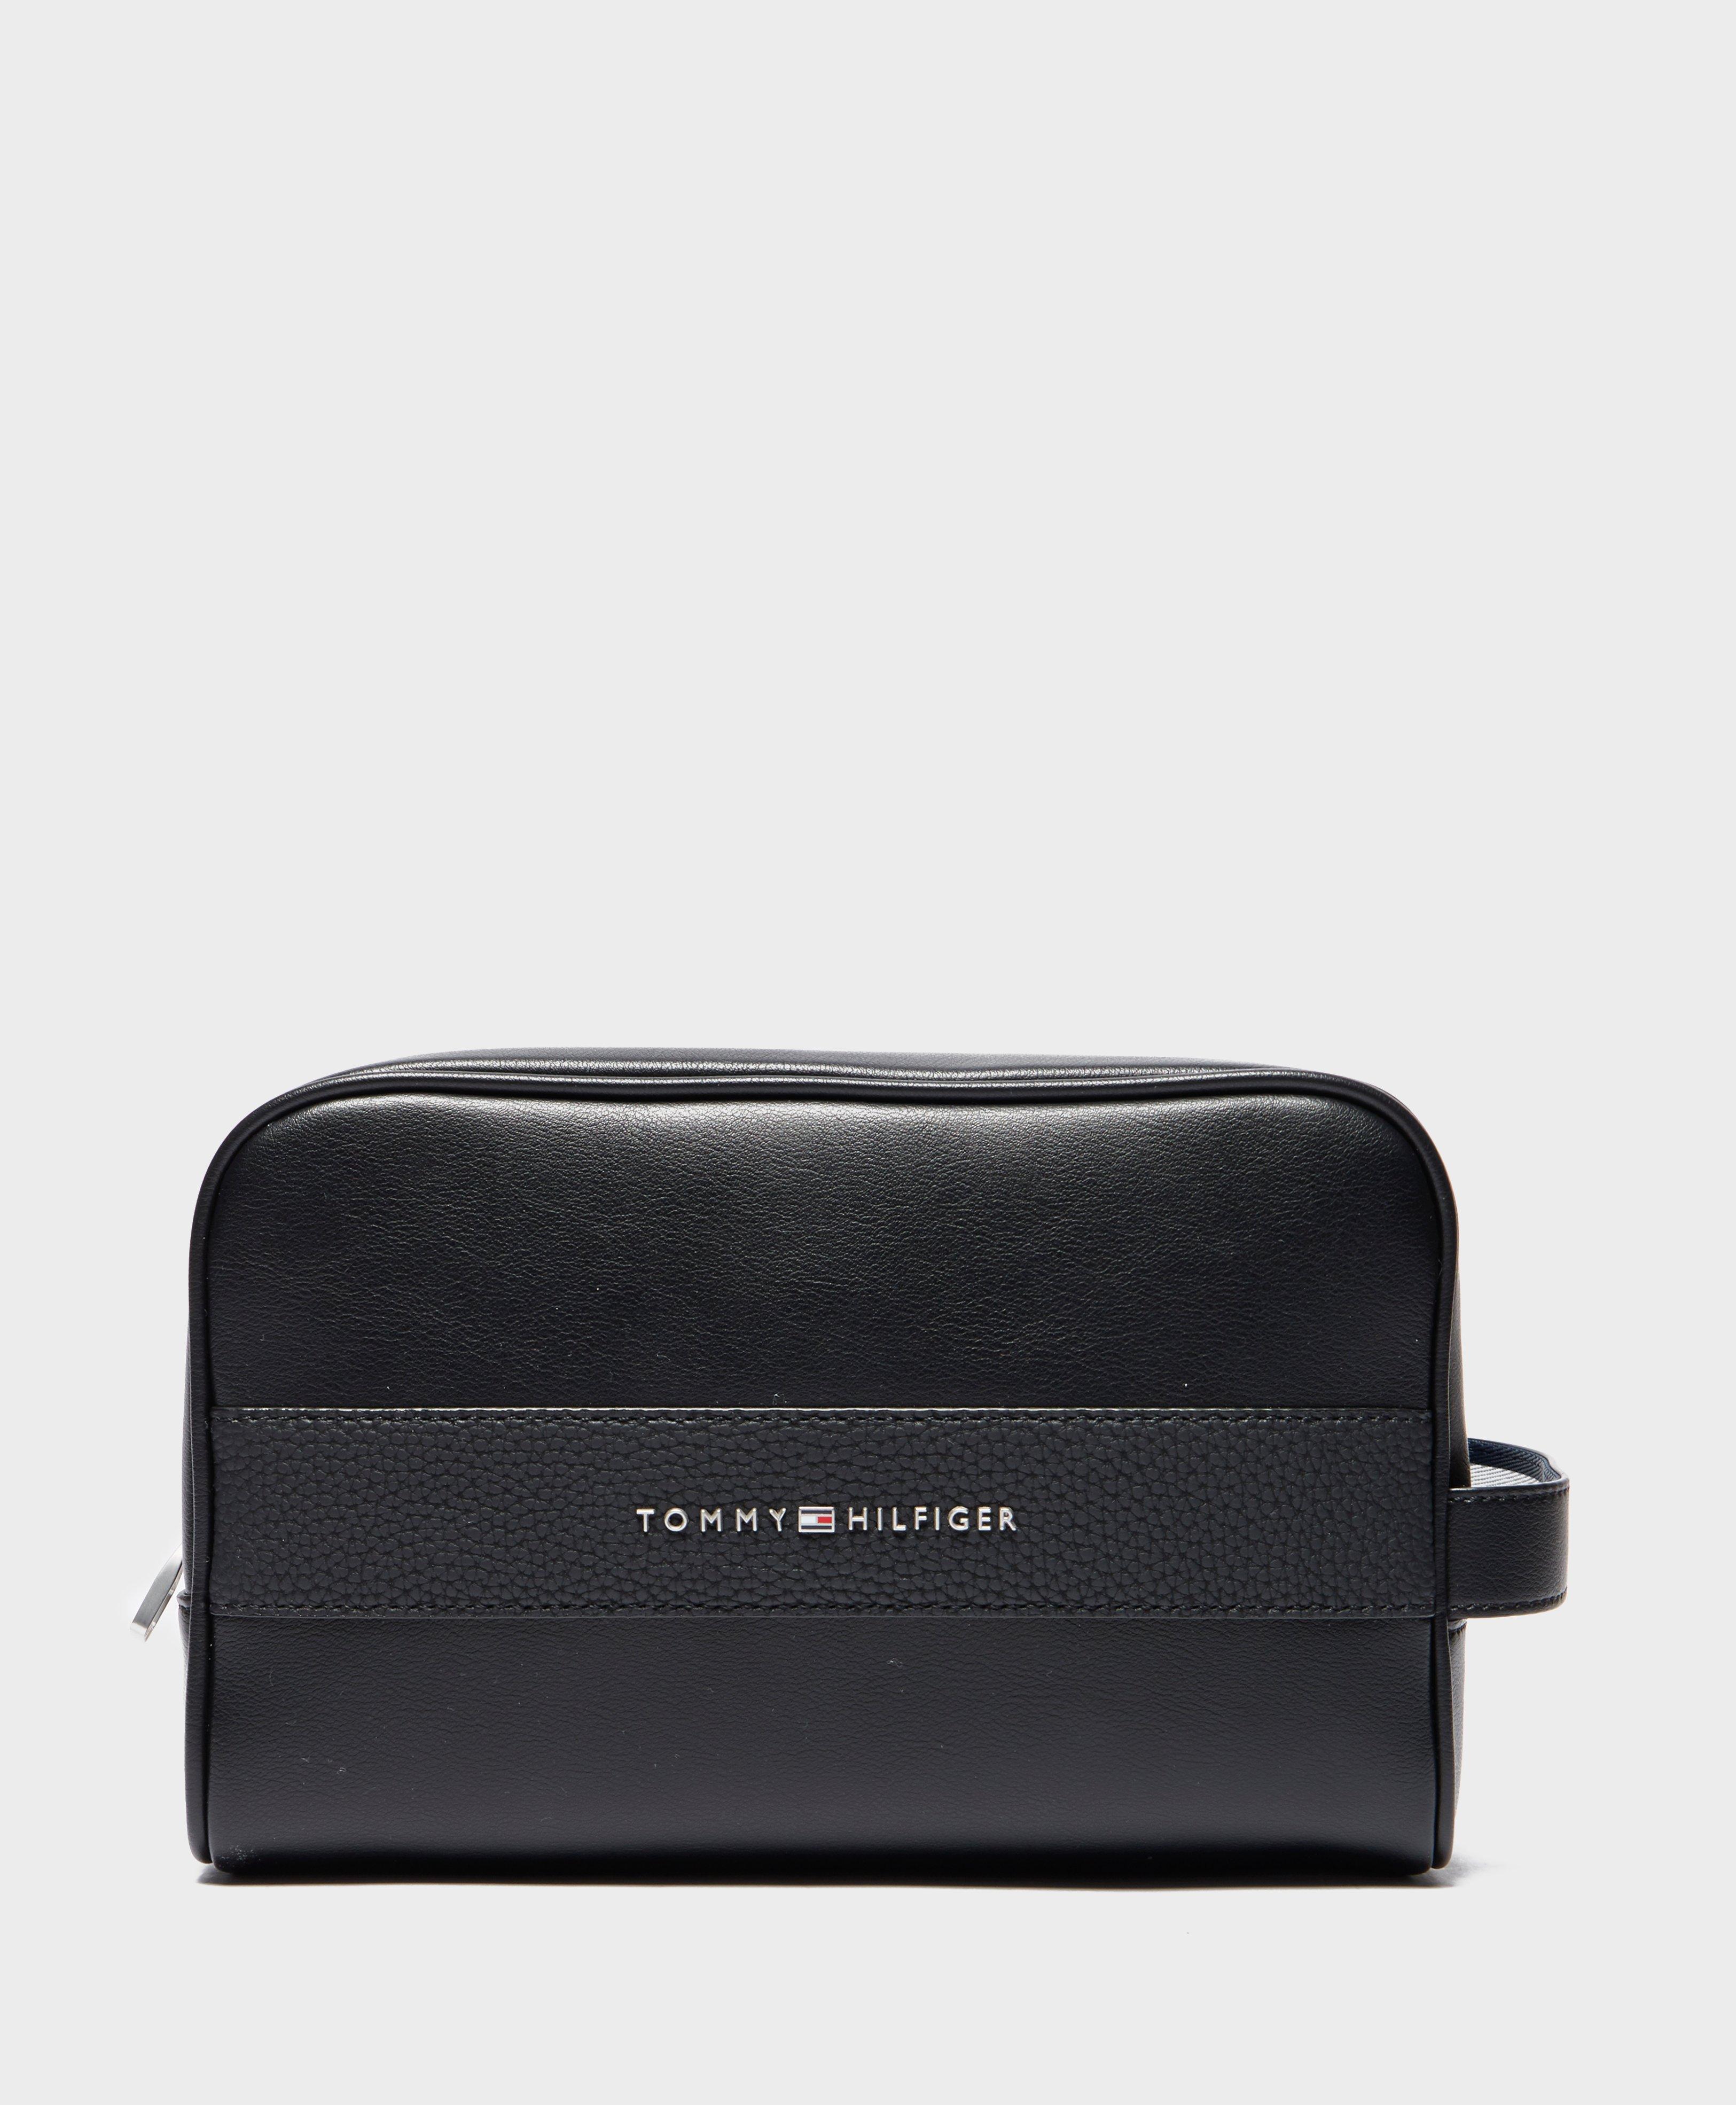 Tommy Hilfiger Mens Toiletry Bag Italy, SAVE 30% - mpgc.net